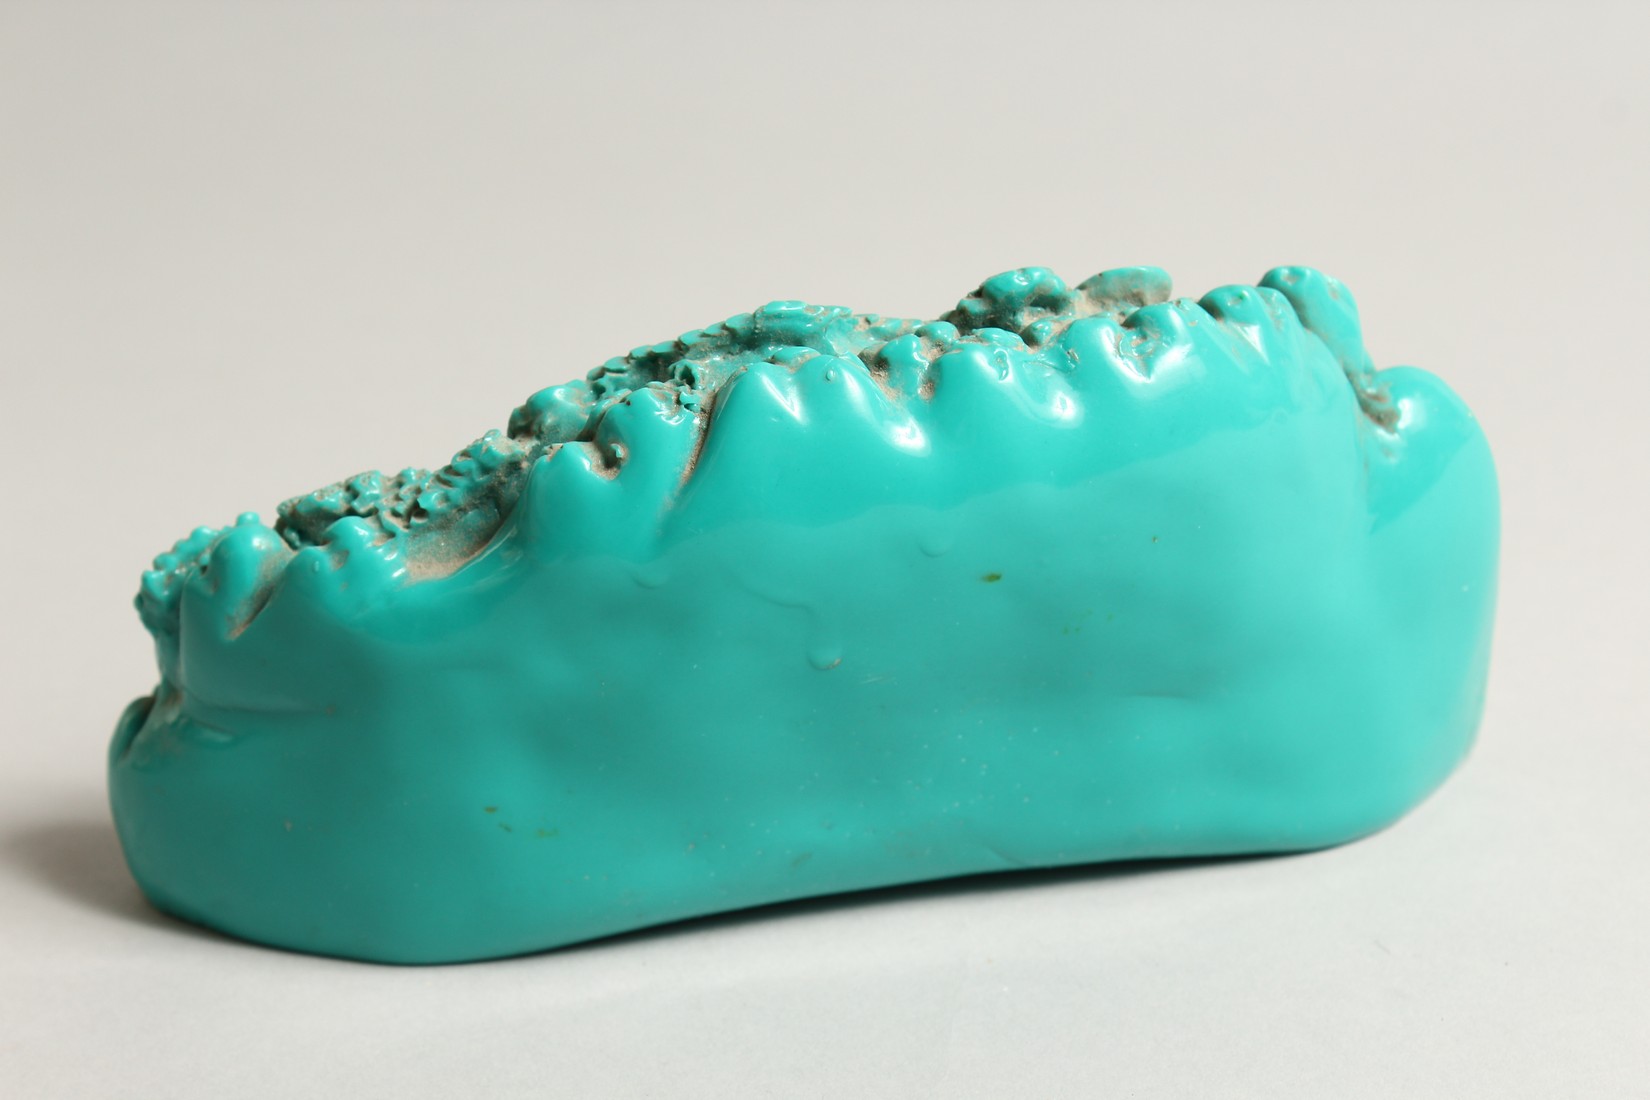 A CHINESE CARVED TURQUOISE BOULDER 9.5ins long. - Image 3 of 3